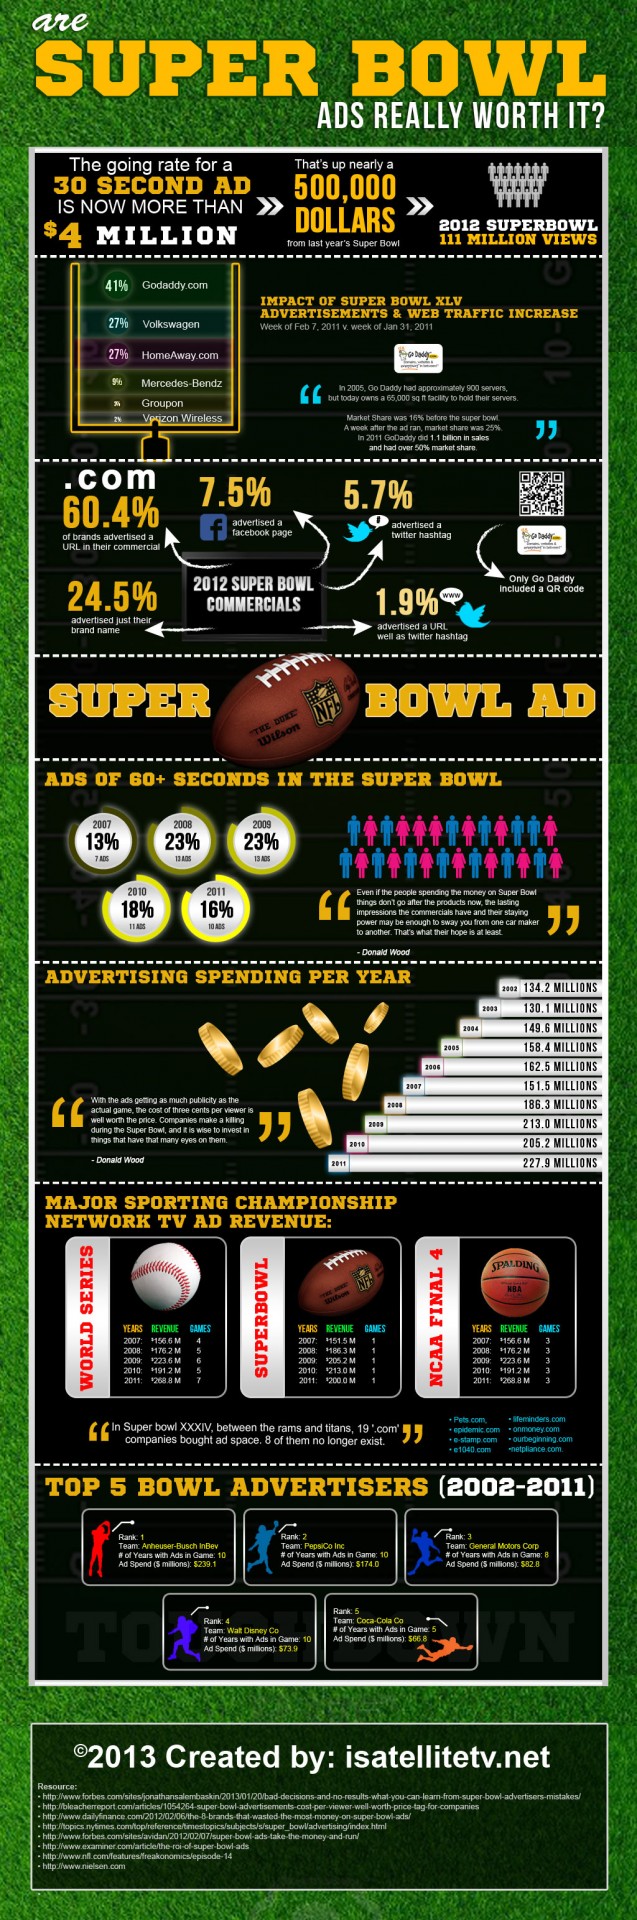 Superbowl Ads: Are They Really Worthwhile?